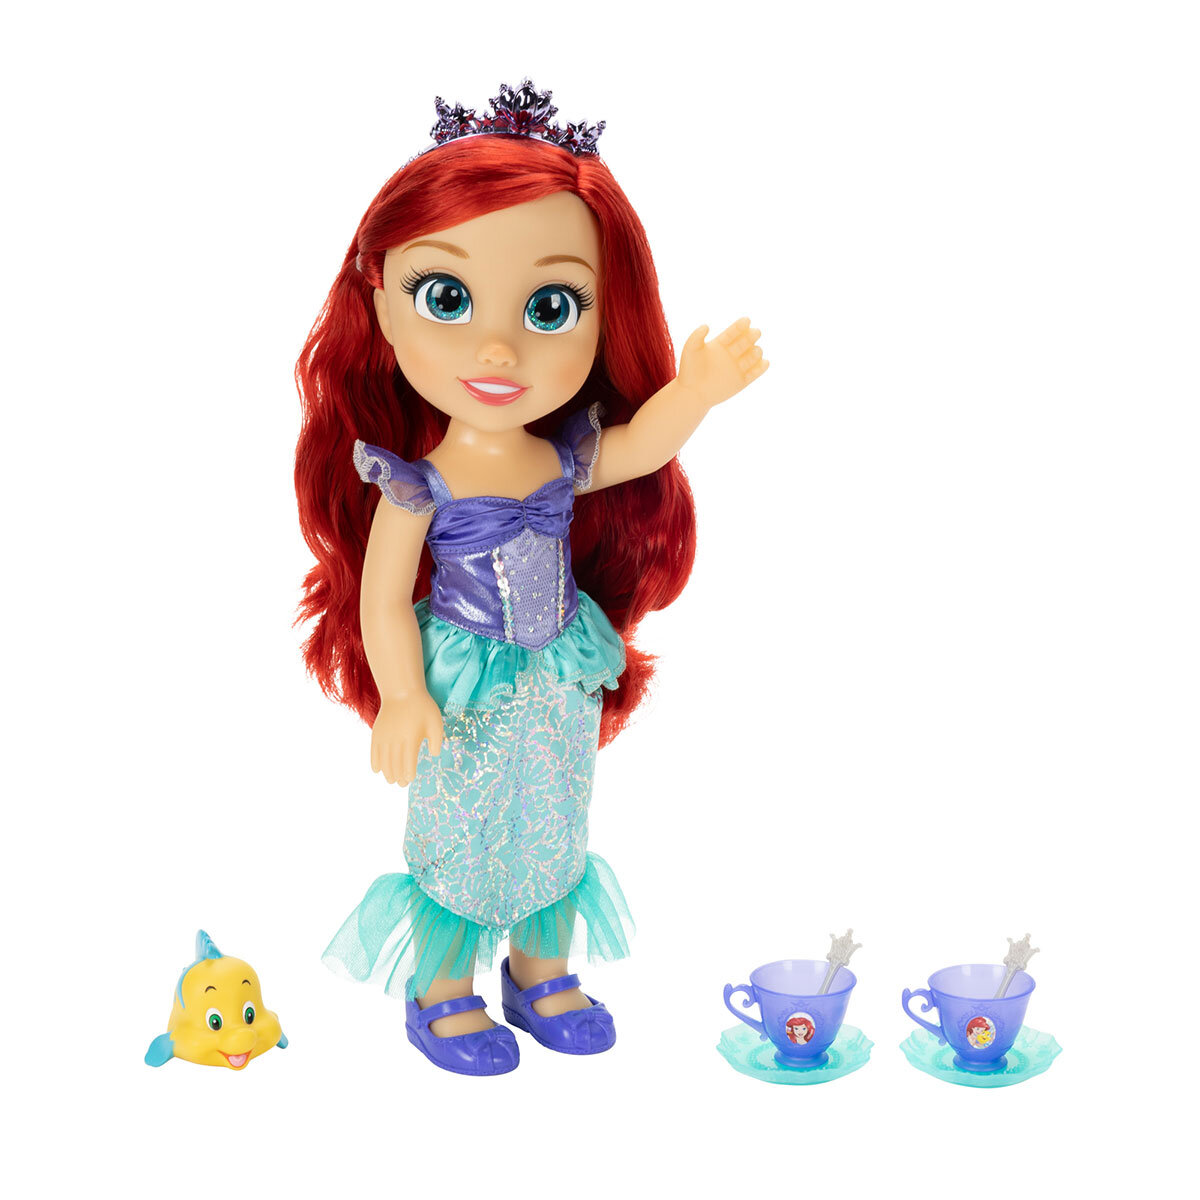 Buy Disney Tea Time Party Doll Ariel & Flounder Side of Box at Costco.co.uk